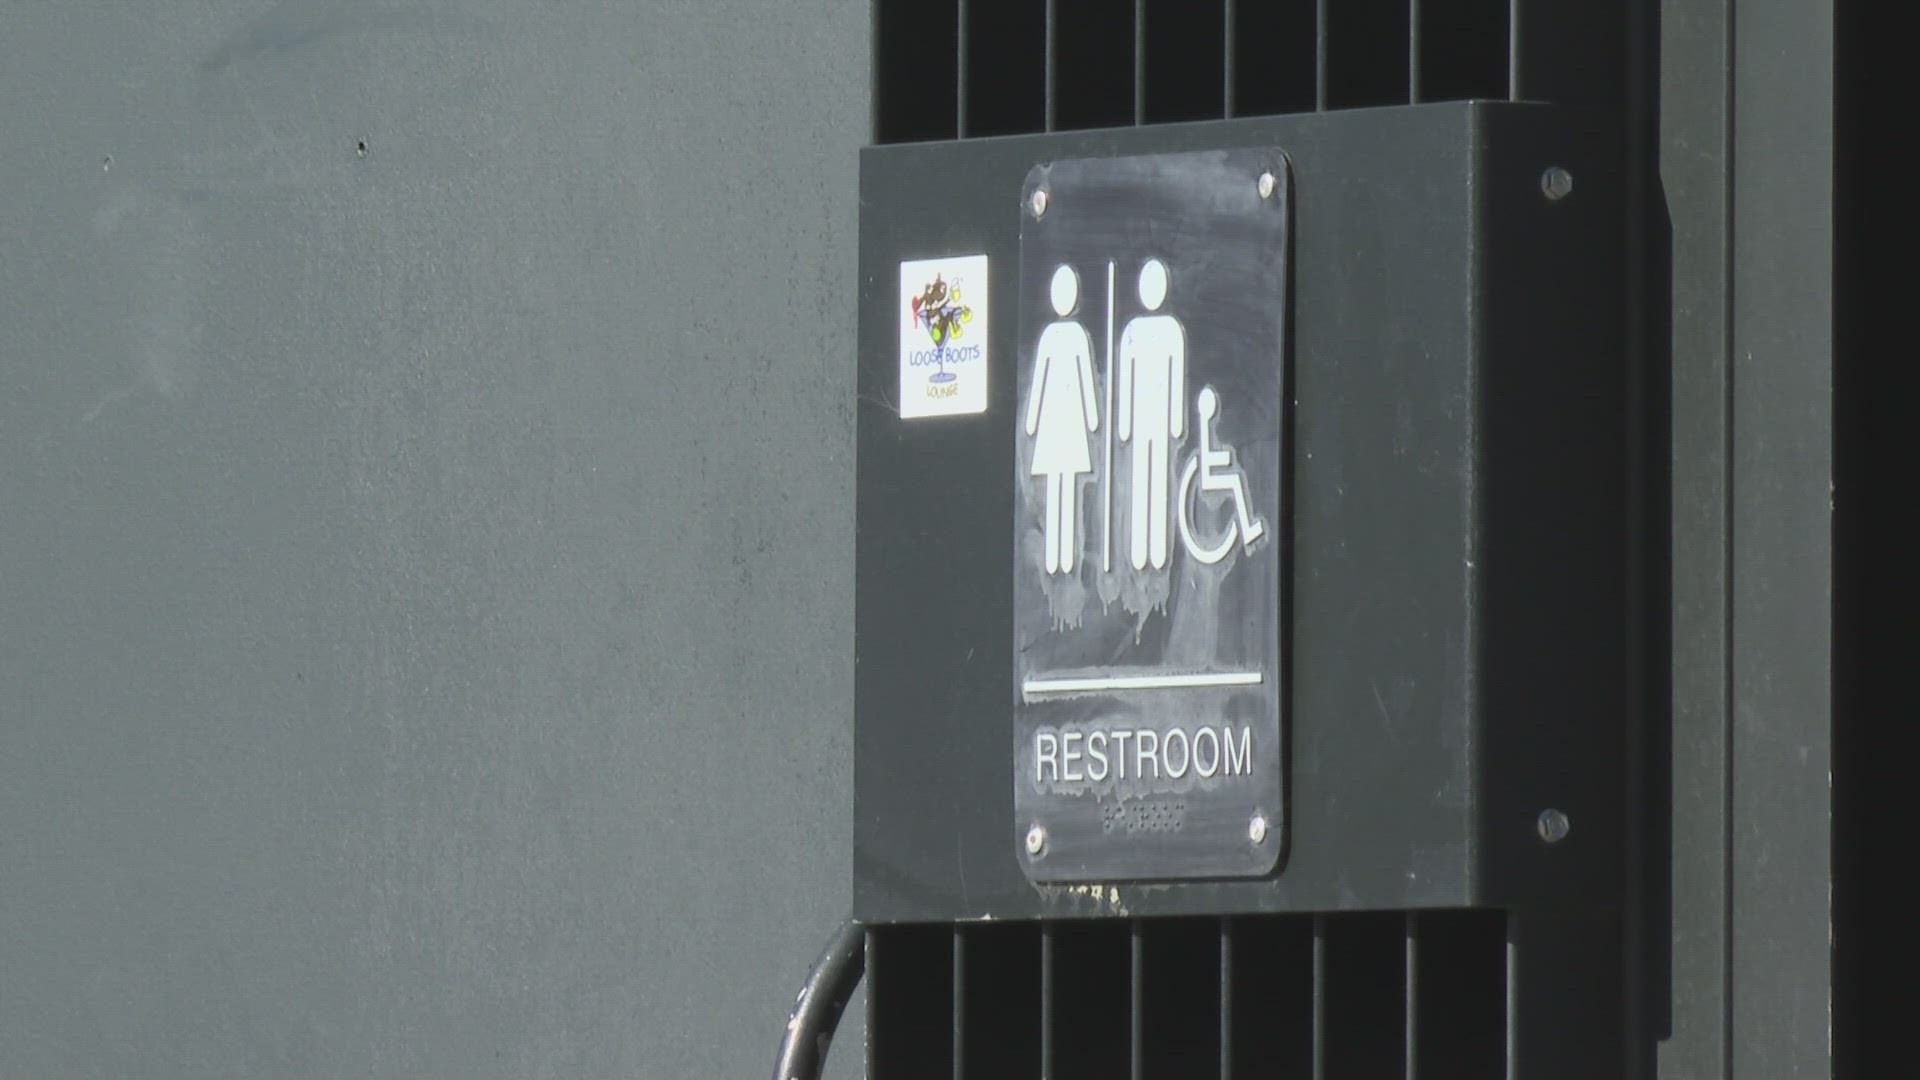 As municipalities look for ways to improve their communities, investing in public restrooms is becoming more of a priority.